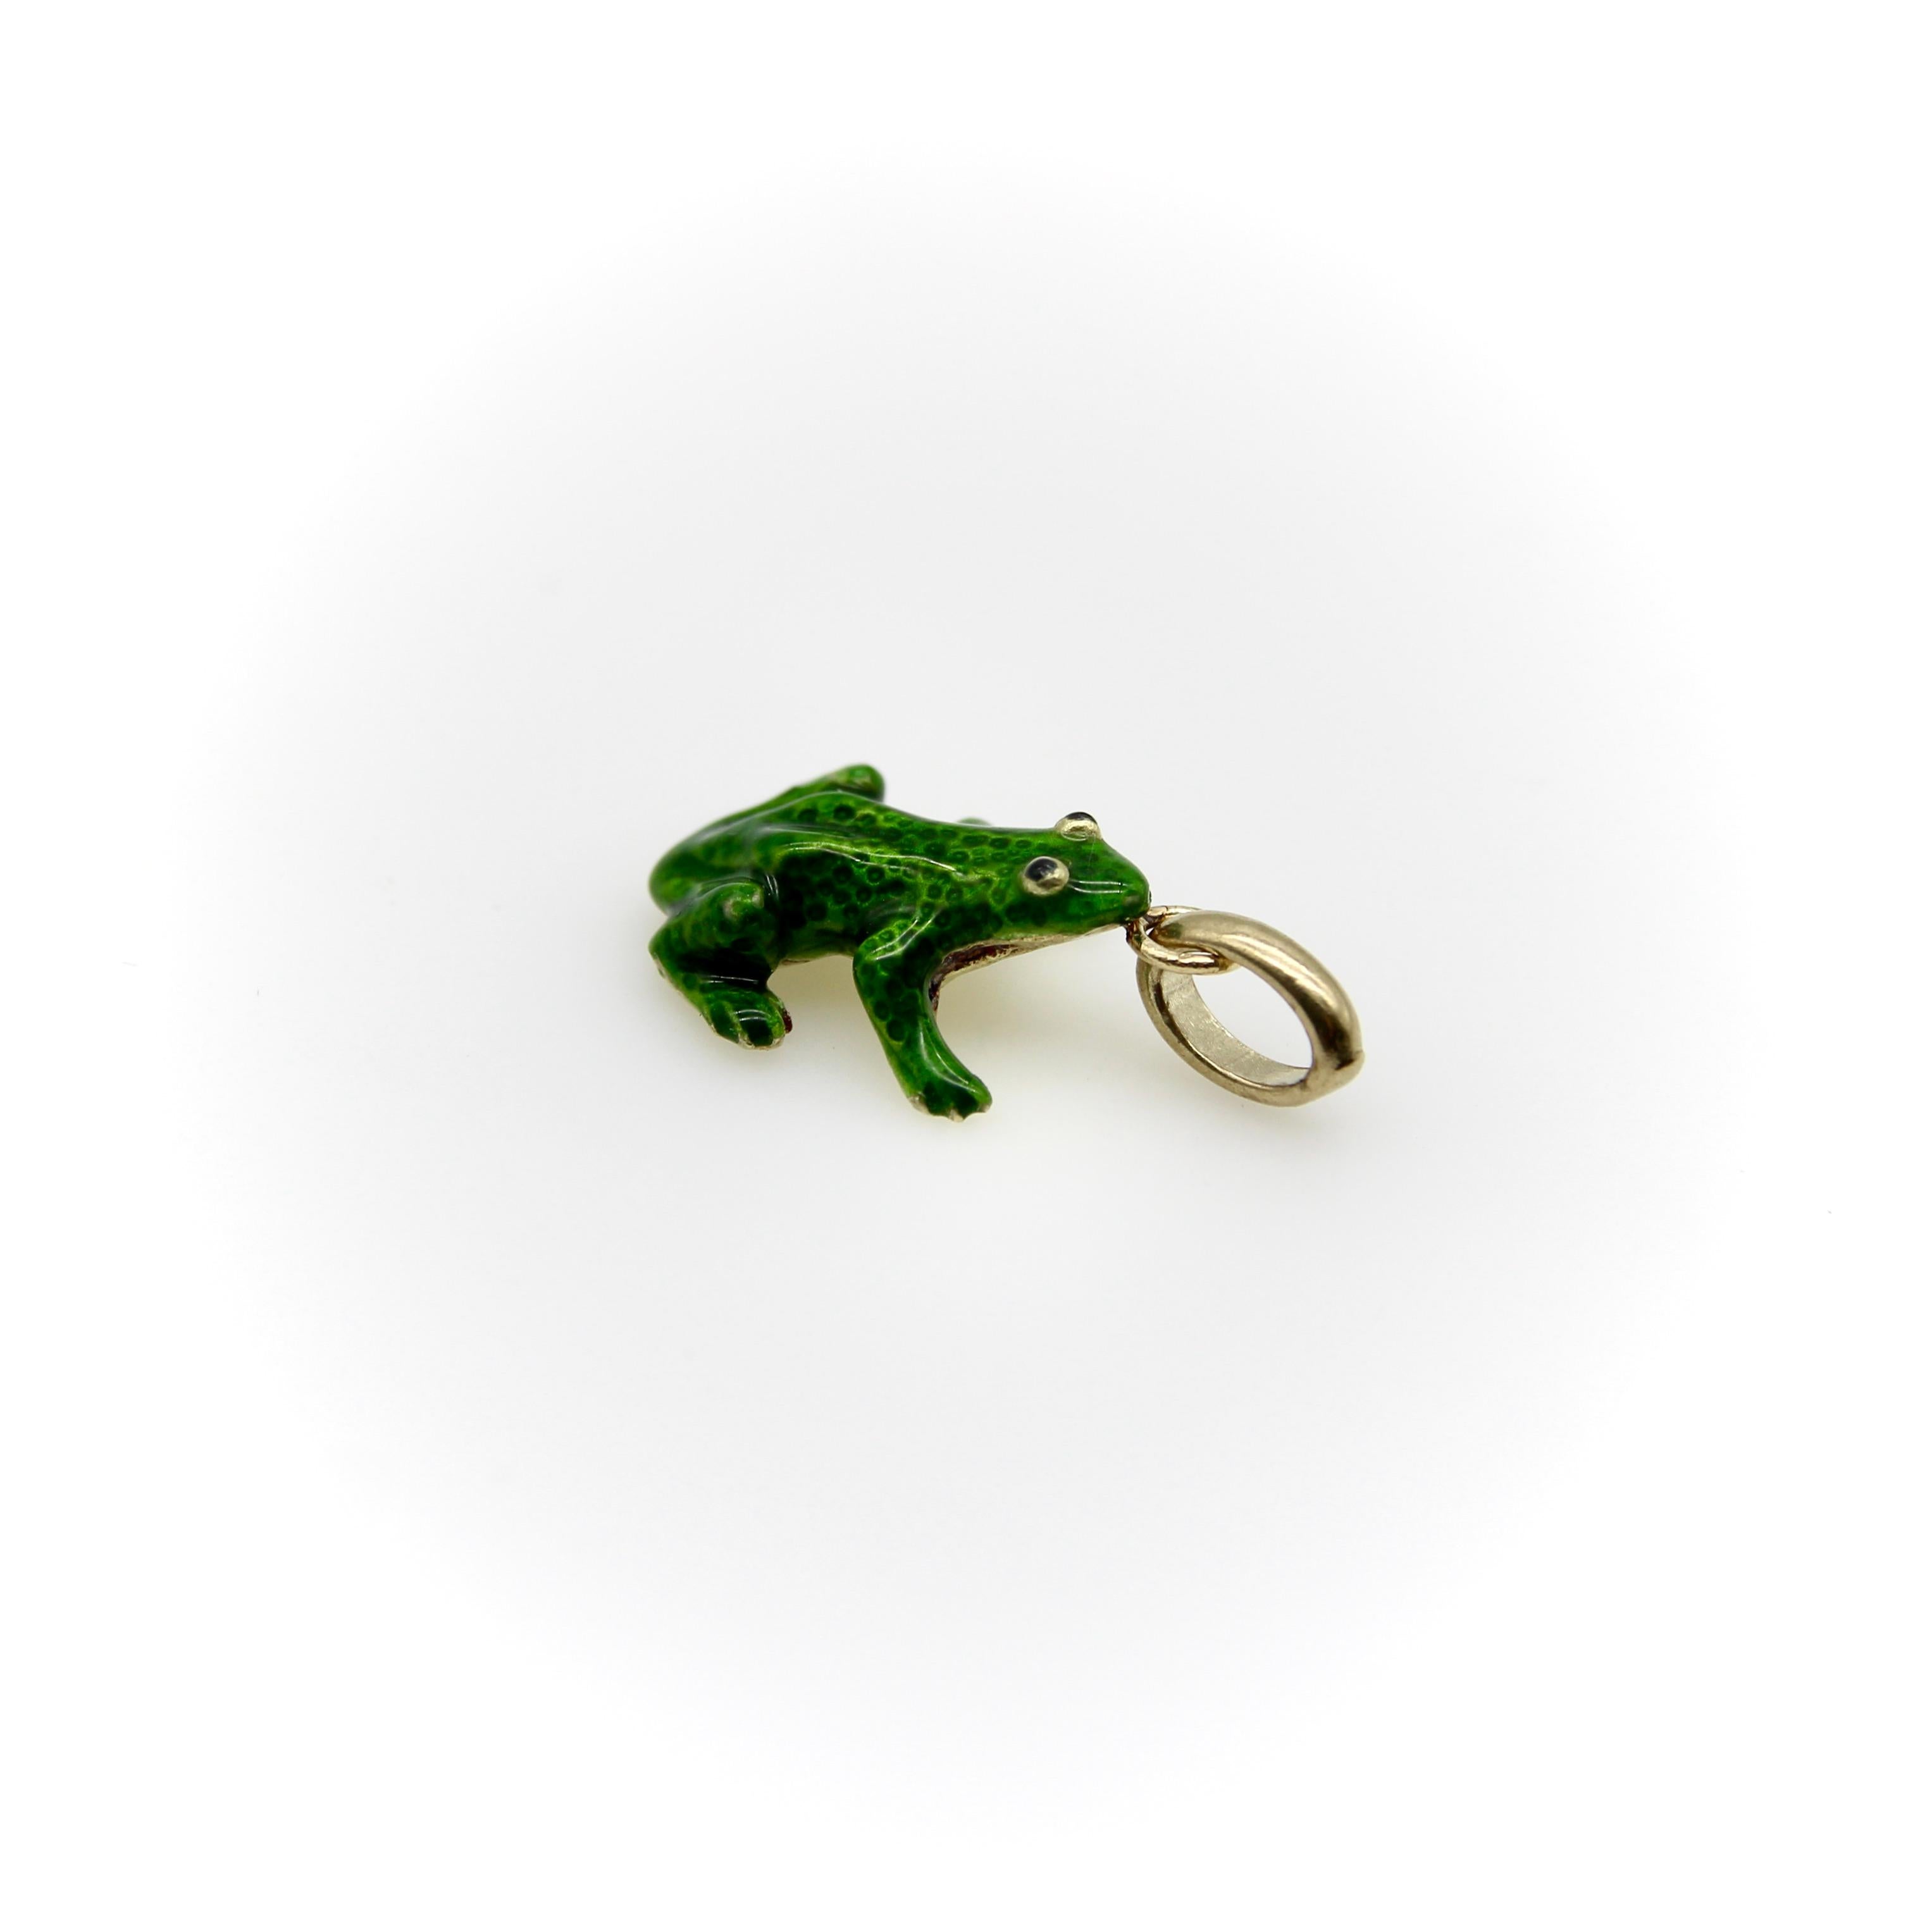 This 14k gold frog charm is detailed and lifelike, posed as if he were about to leap into the air. The charm is covered in green guilloche enamel, transparent enough to reveal the textured gold underneath it. The enamel settles nicely into the